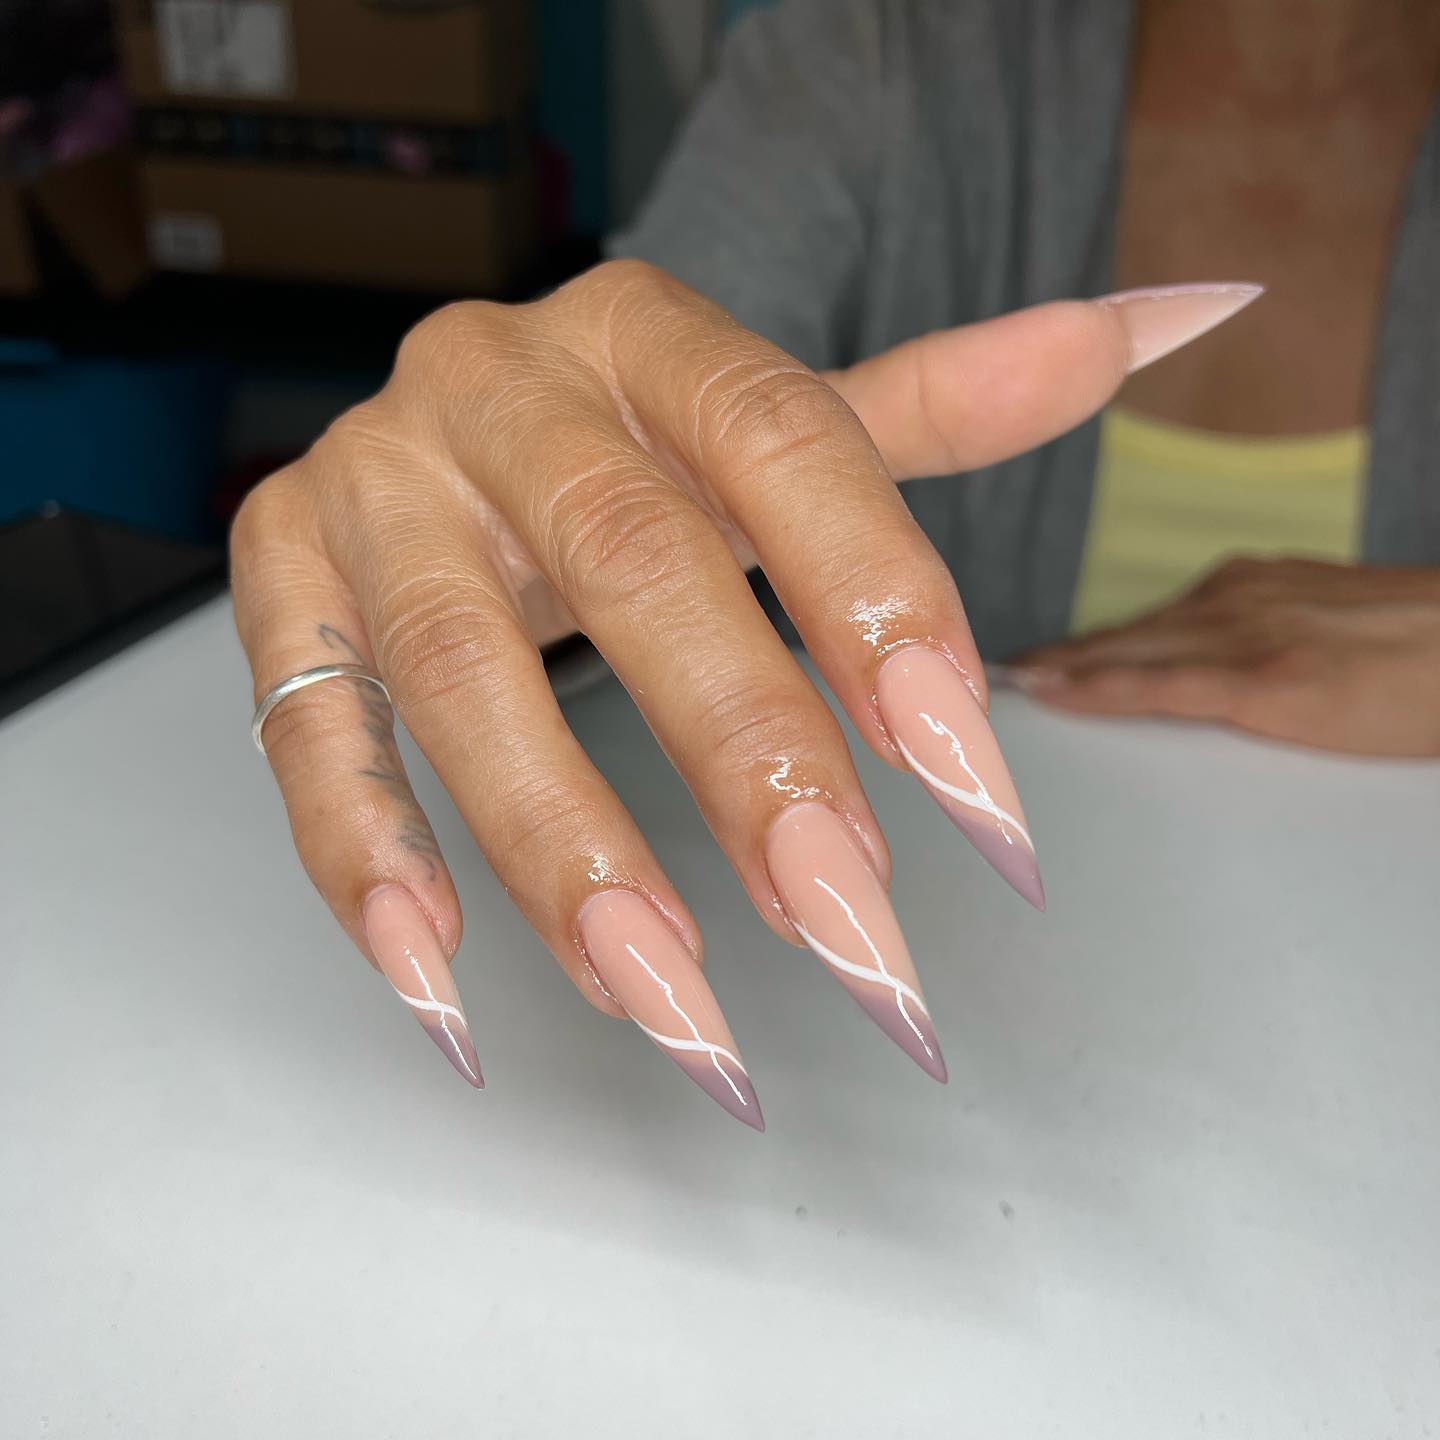 Wanna show off your empowered feminine side with your nails? If your answer is yes, you should give a shot to stiletto nails that taper into a filed point. Plus, line nail art will look chic on them.